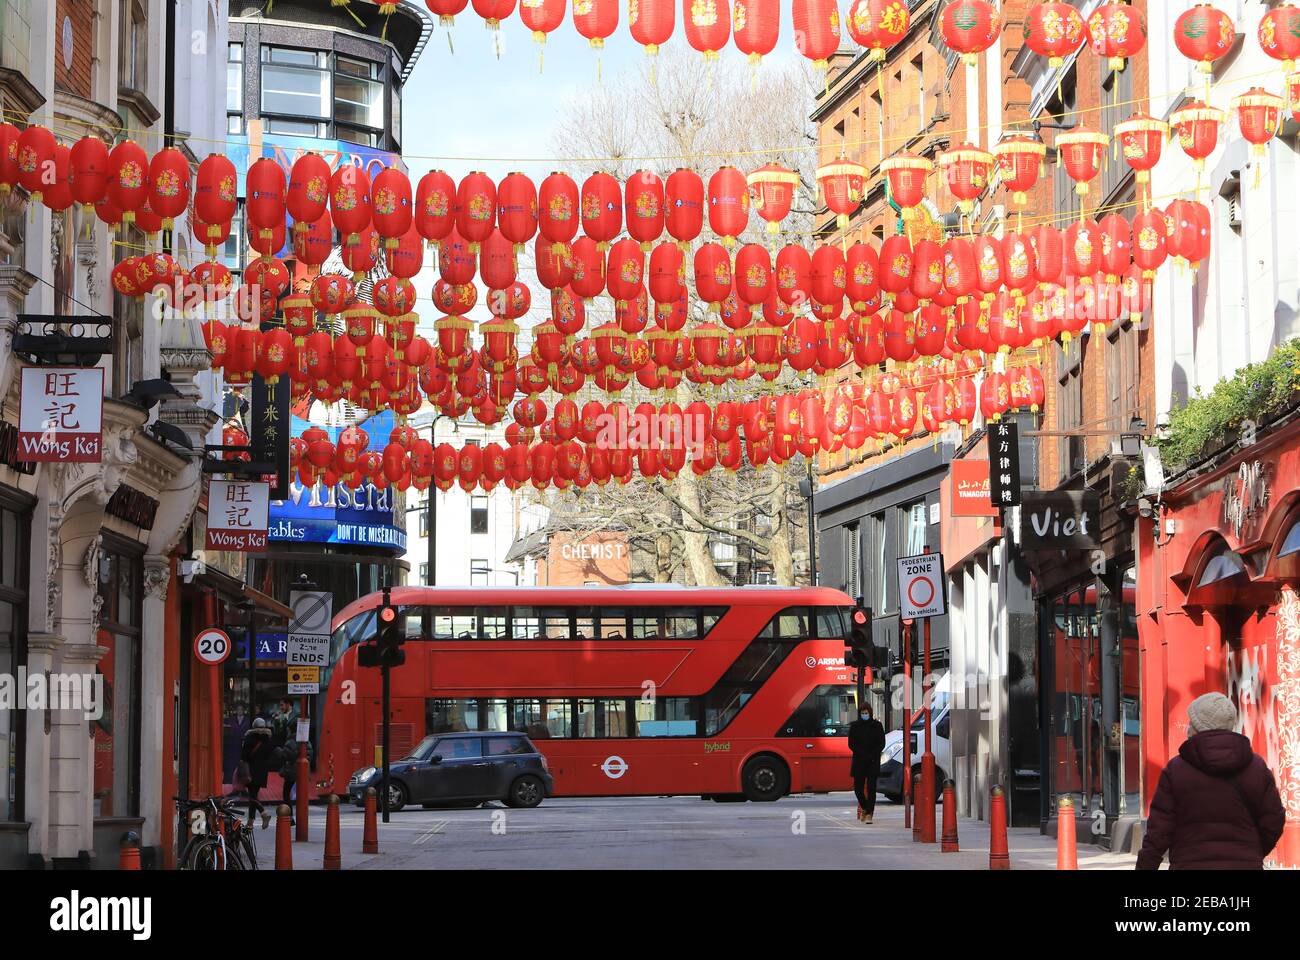 London, UK, February 12th 2021. Traditional lanterns up for Chinese New Year celebrations in China Town, Soho, London, UK. Covid restrictions and freezing temperatures meant people had to celebrate at home for the start of the Year of the Ox. Monica Wells/Alamy Live News Stock Photo